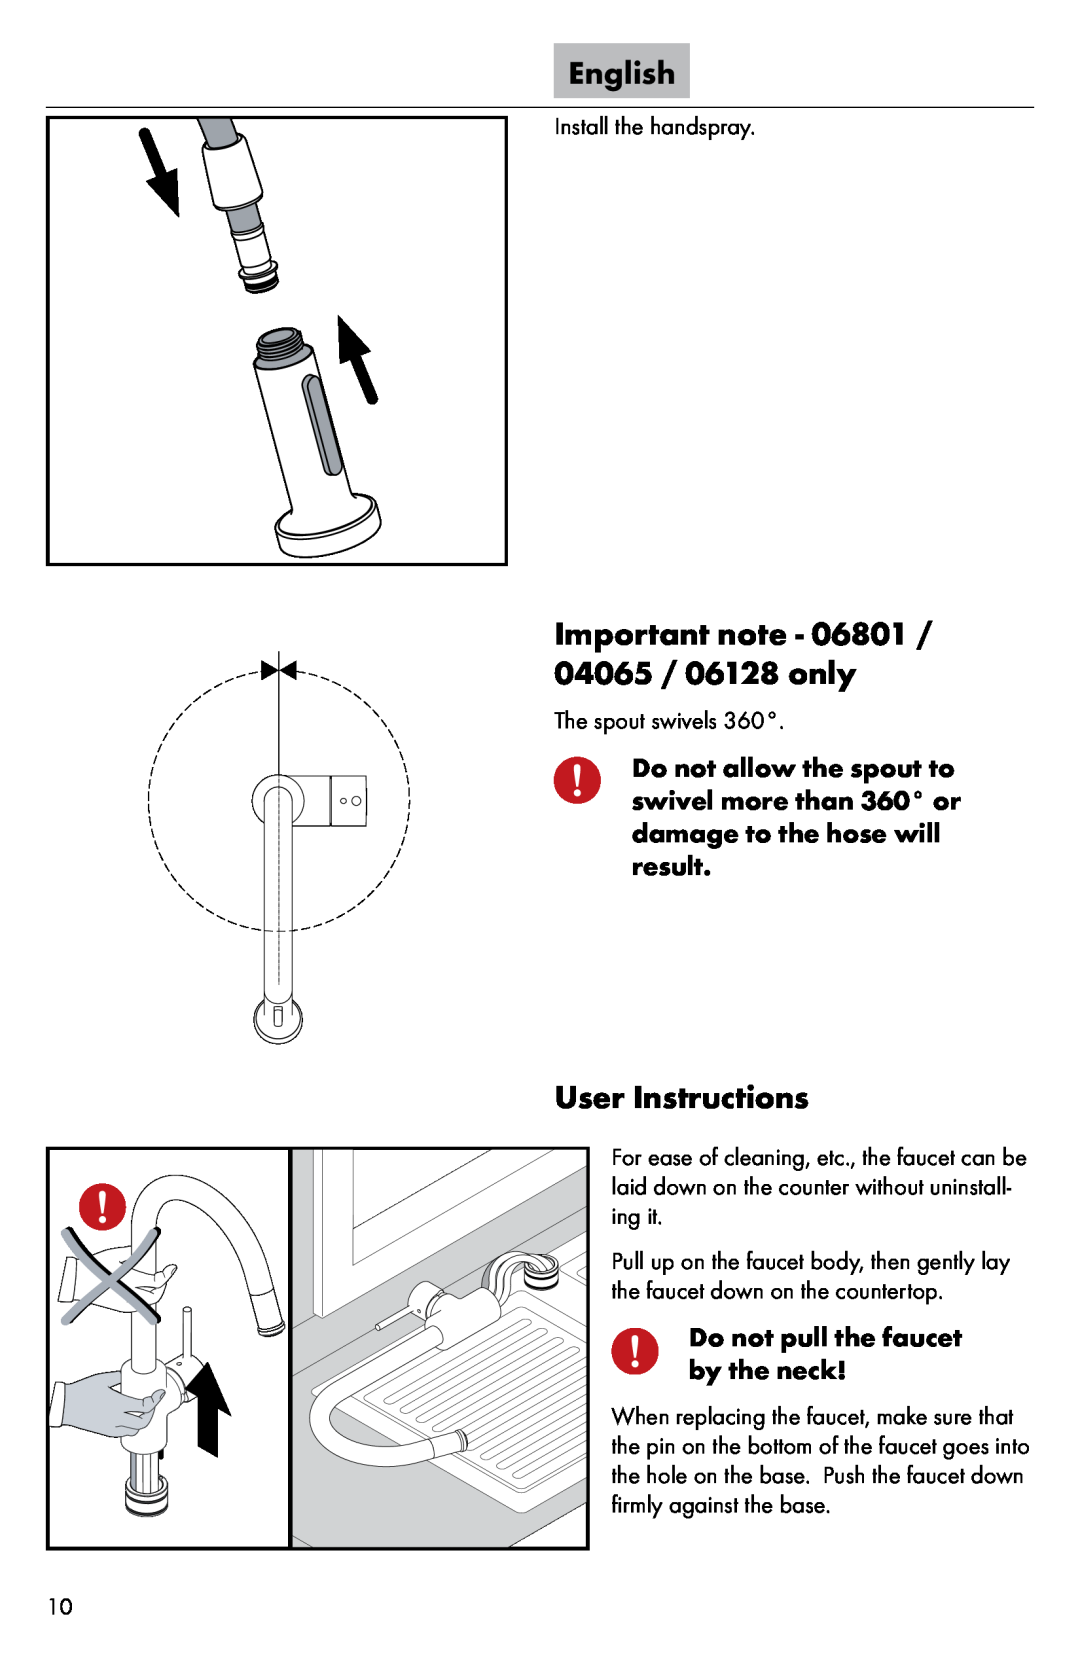 Axor 04065XX0 Important note - 06801 / 04065 / 06128 only, User Instructions, Do not pull the faucet by the neck, English 